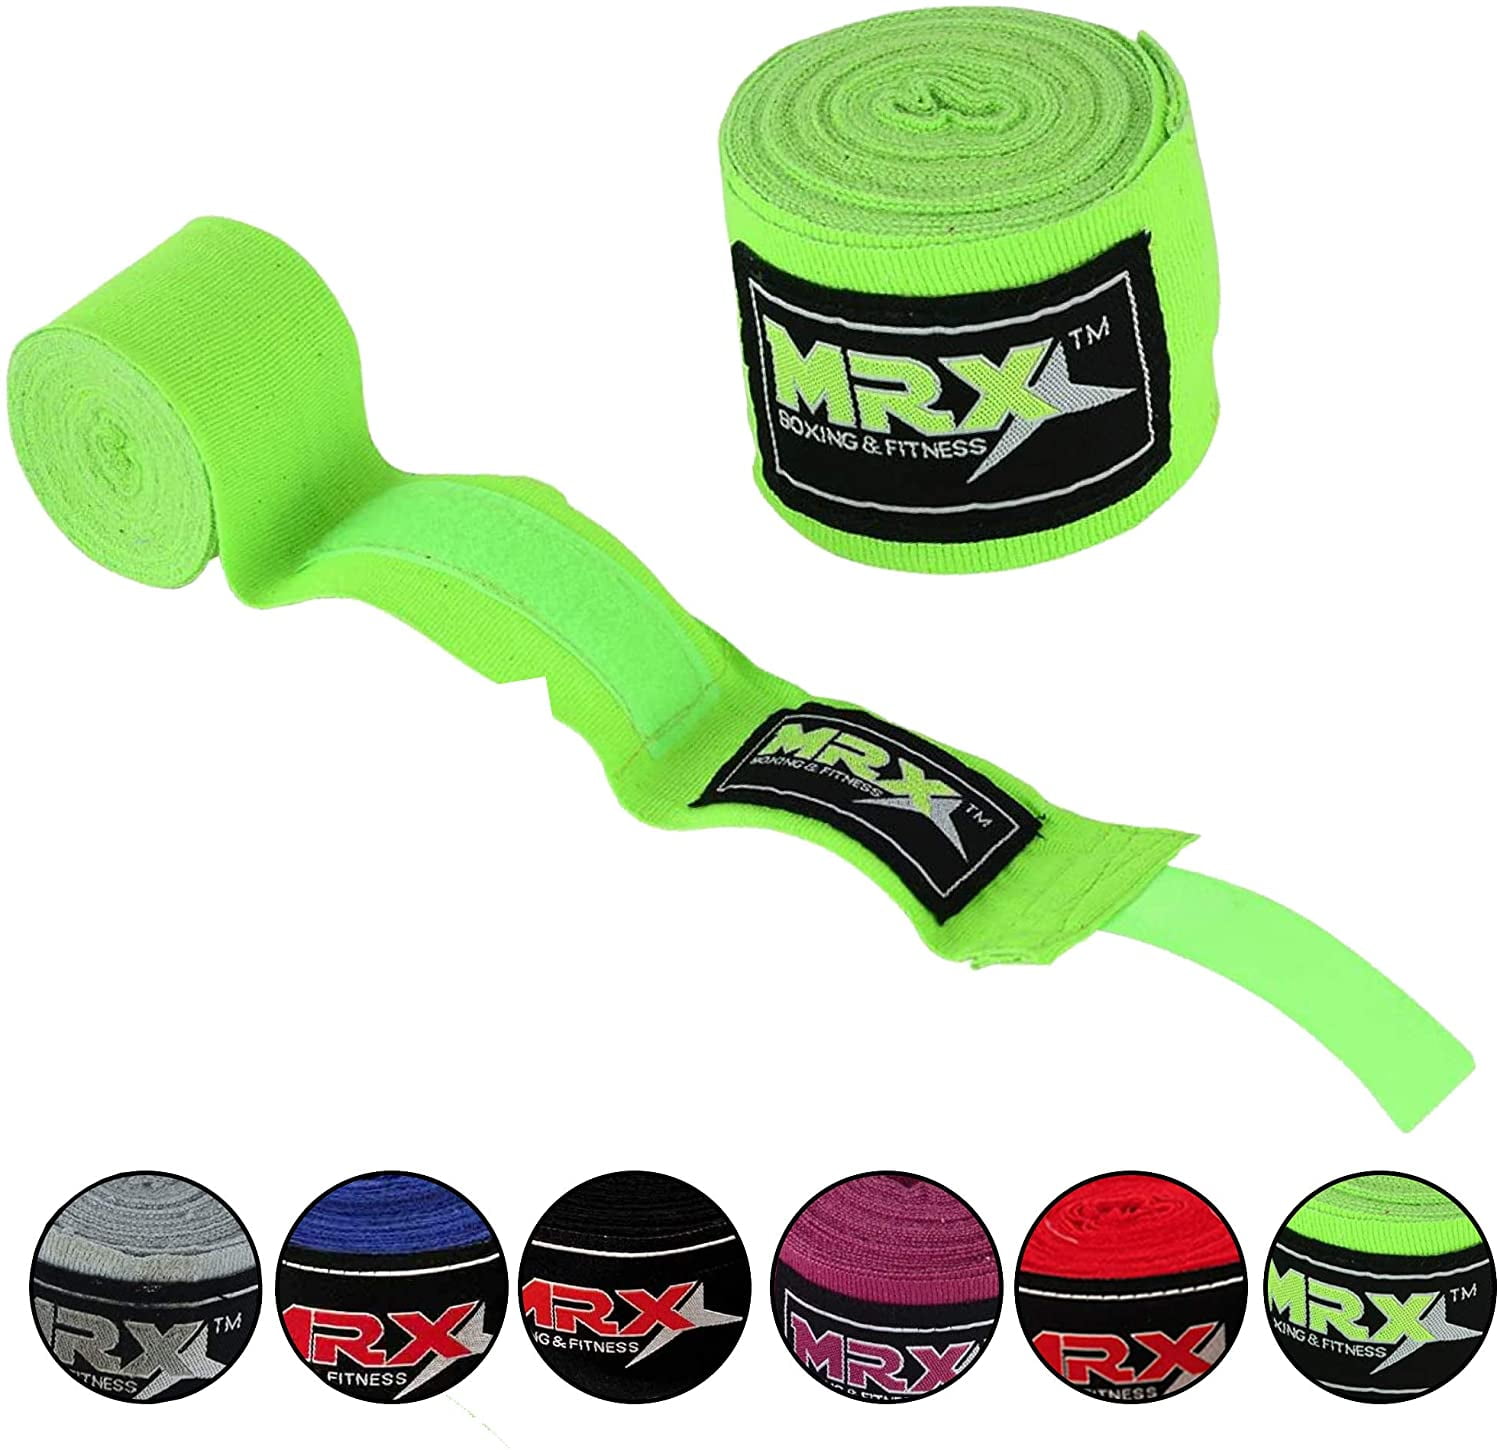 Details about   Counter Strike HANDWRAPS Protective Elastic HAND WRAPS Blue Green Pink 120" 